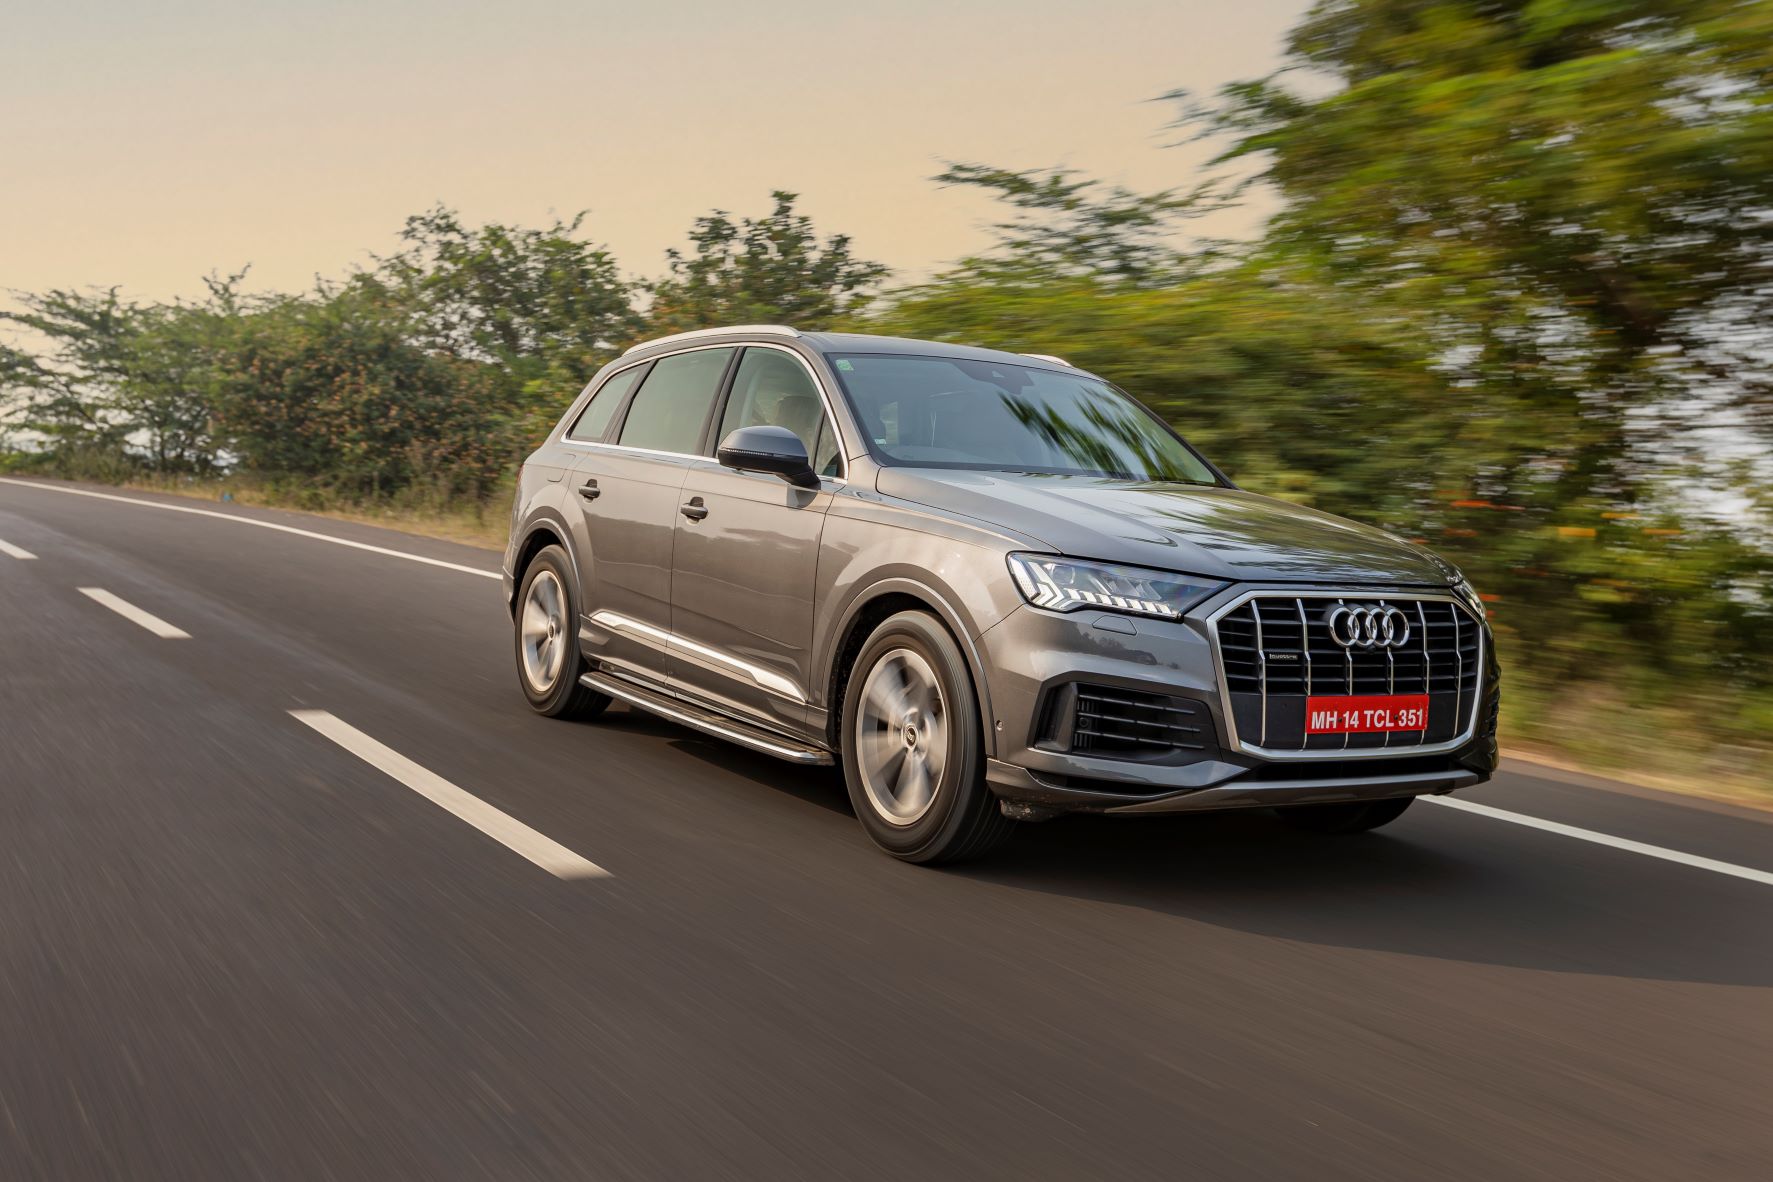 Get on the road to luxury. Discover our range of curated Audi merchandise  through the link in bio. #AudiShop #AudiIndia